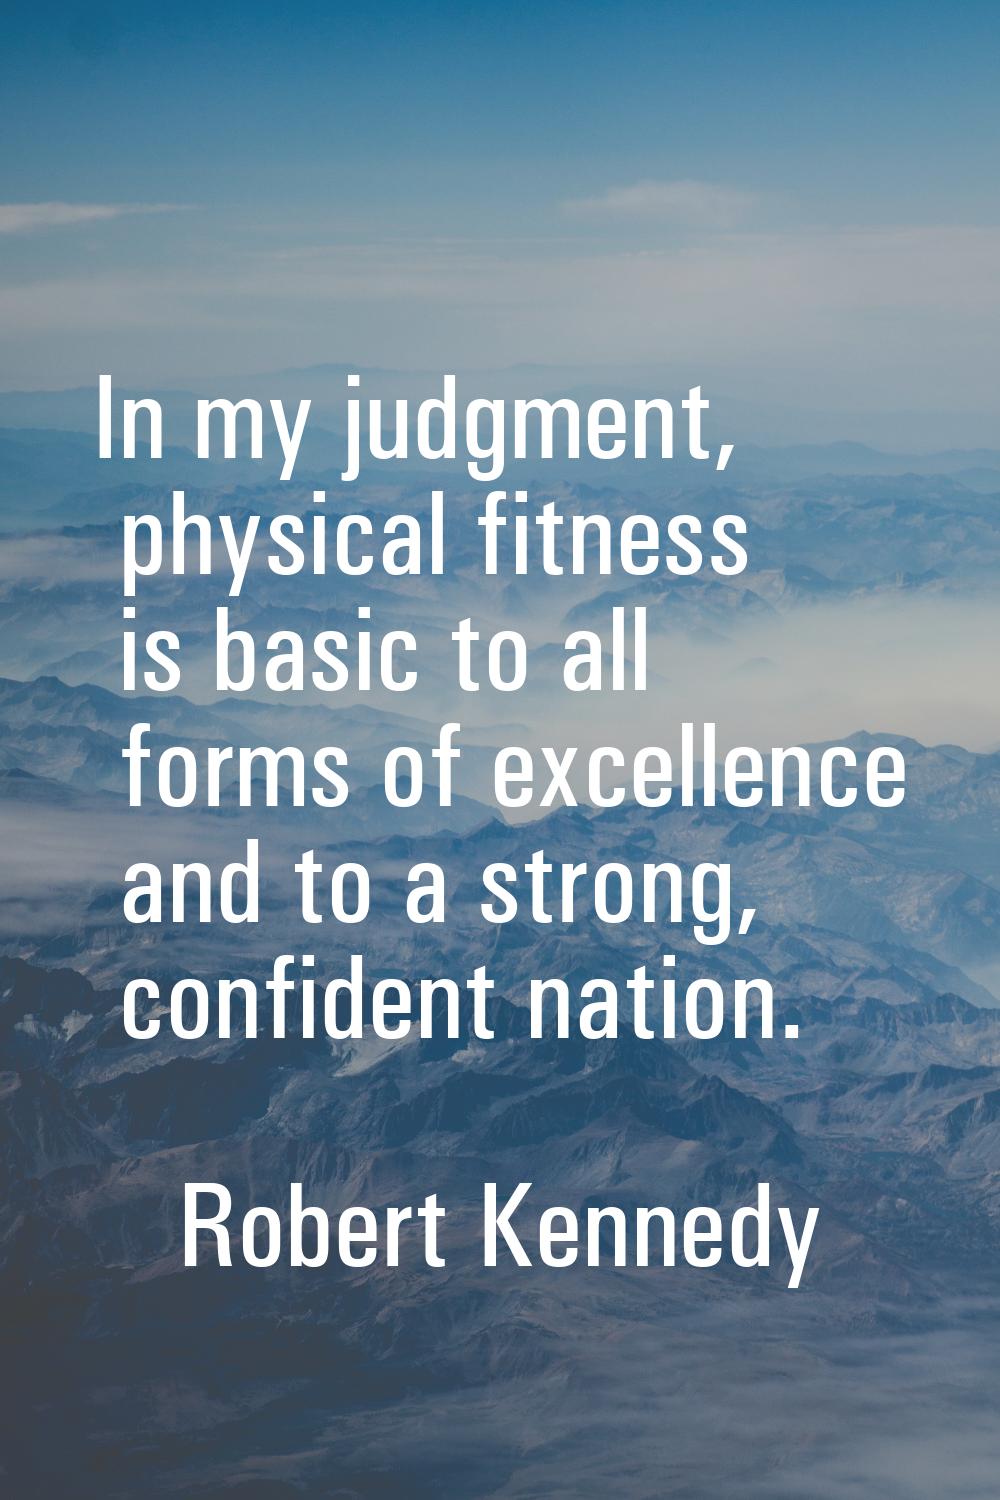 In my judgment, physical fitness is basic to all forms of excellence and to a strong, confident nat